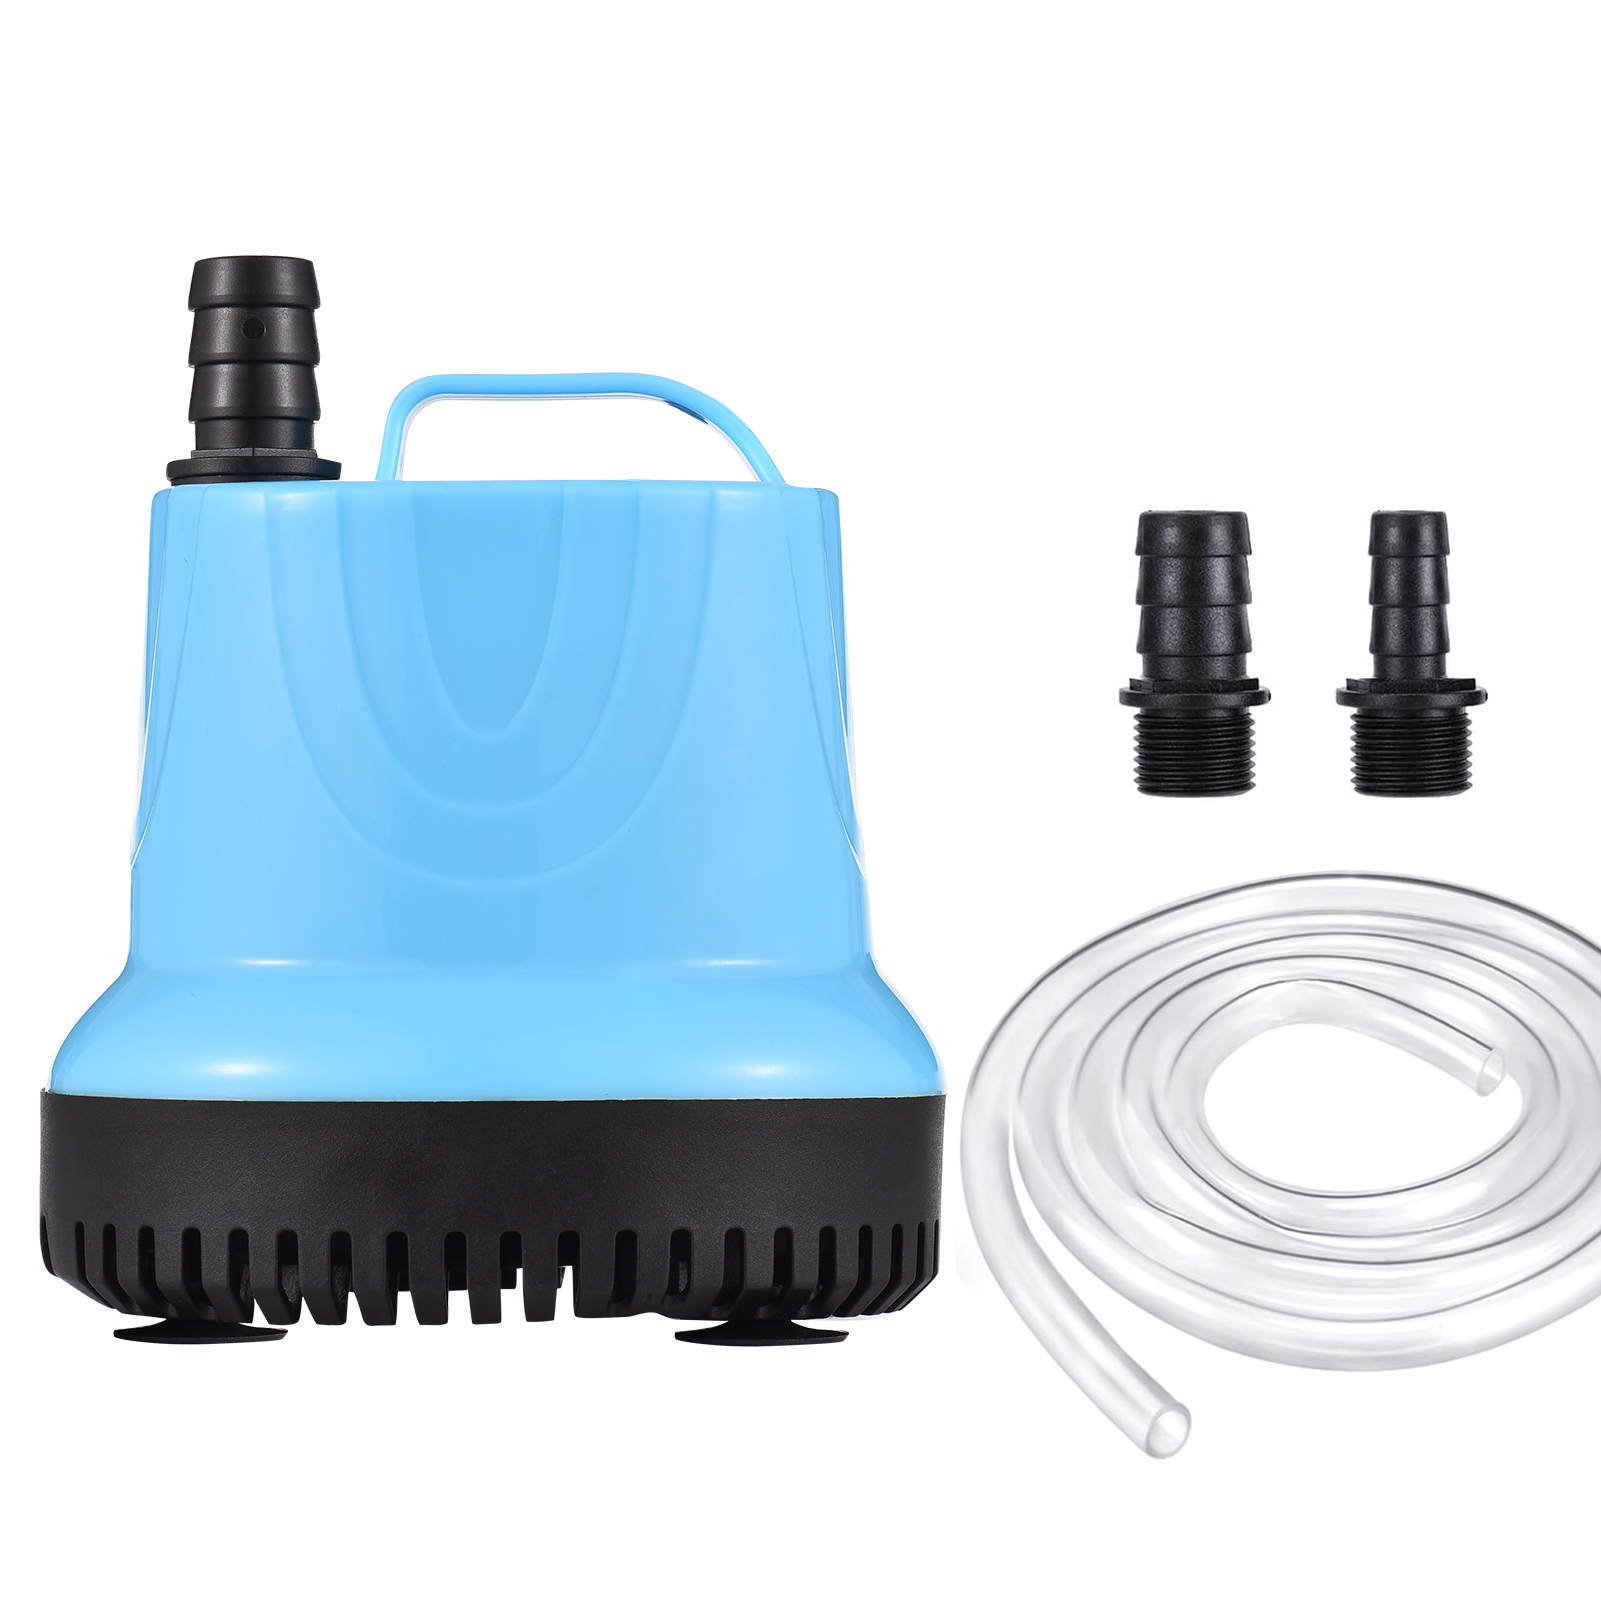 55W 2800L/H 8.53ft Aquarium Bottom Suction Submersible Water Pump Fountain Pump with 4M Water Tubing 2 Nozzles for Fish Tank Pond Fountain Statuary Hydroponics Water Feature-US Plug - ShopShipShake